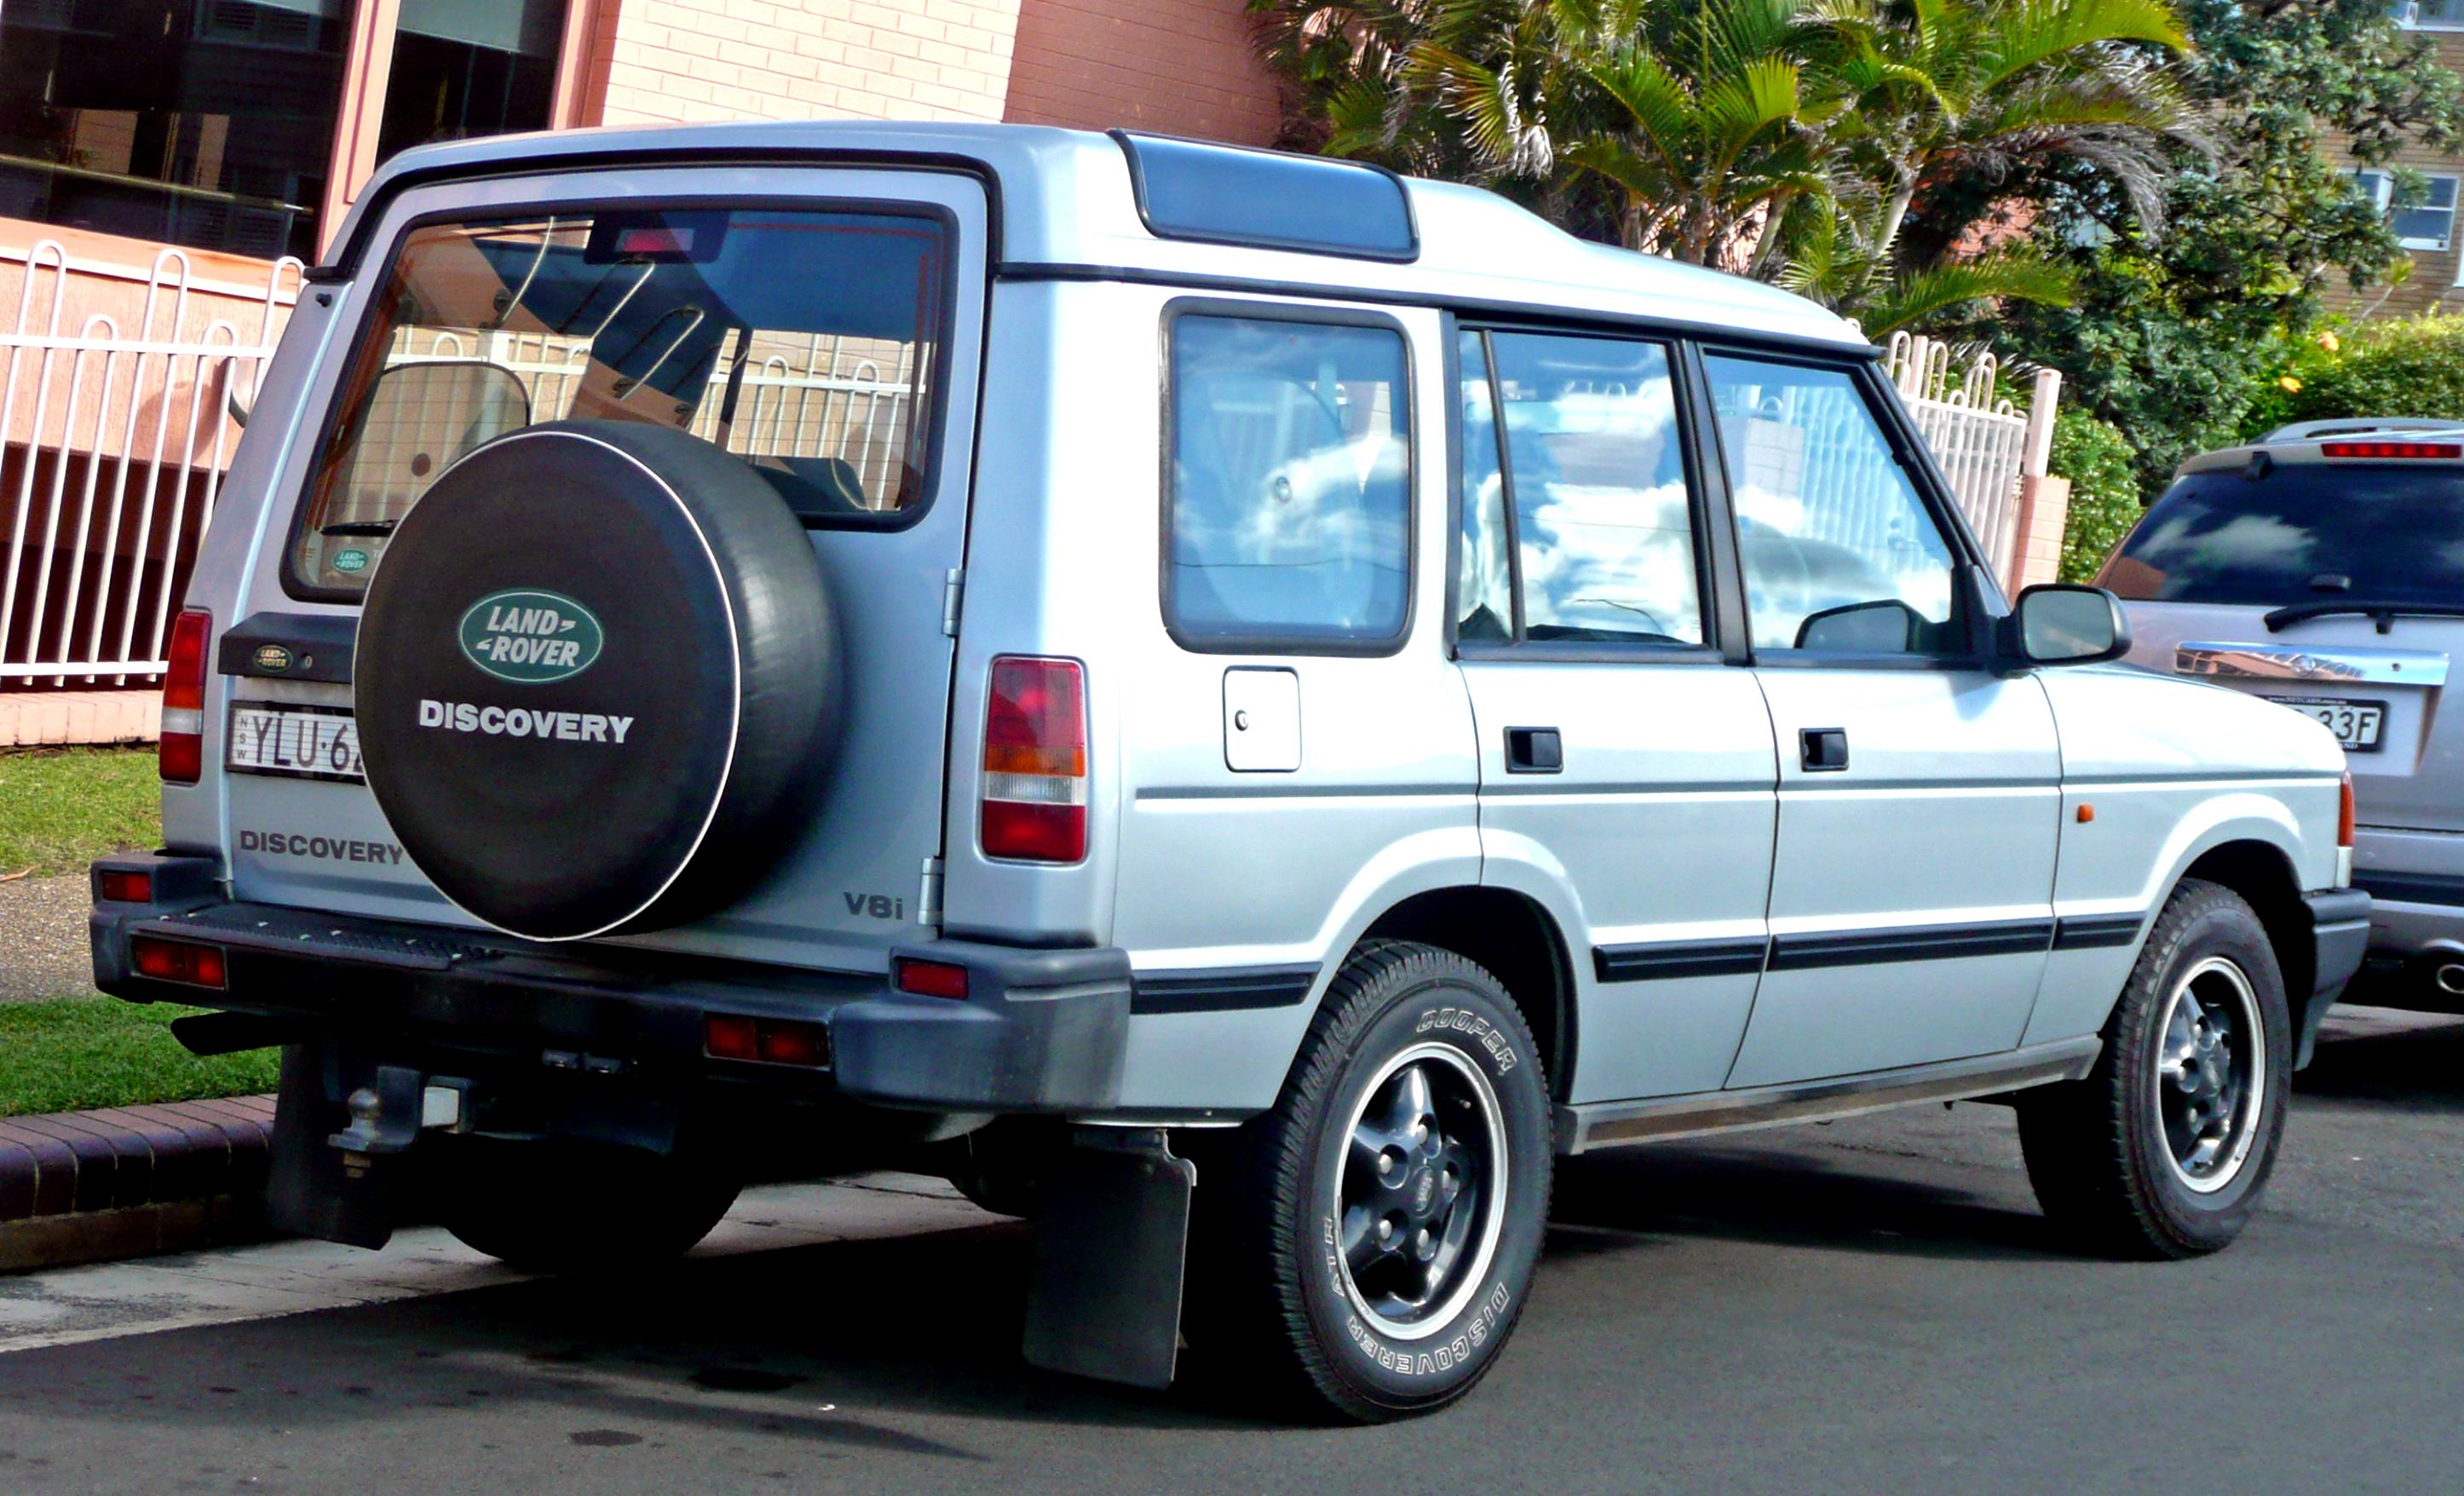 Land Rover Discovery 3 Doors 1990 #1